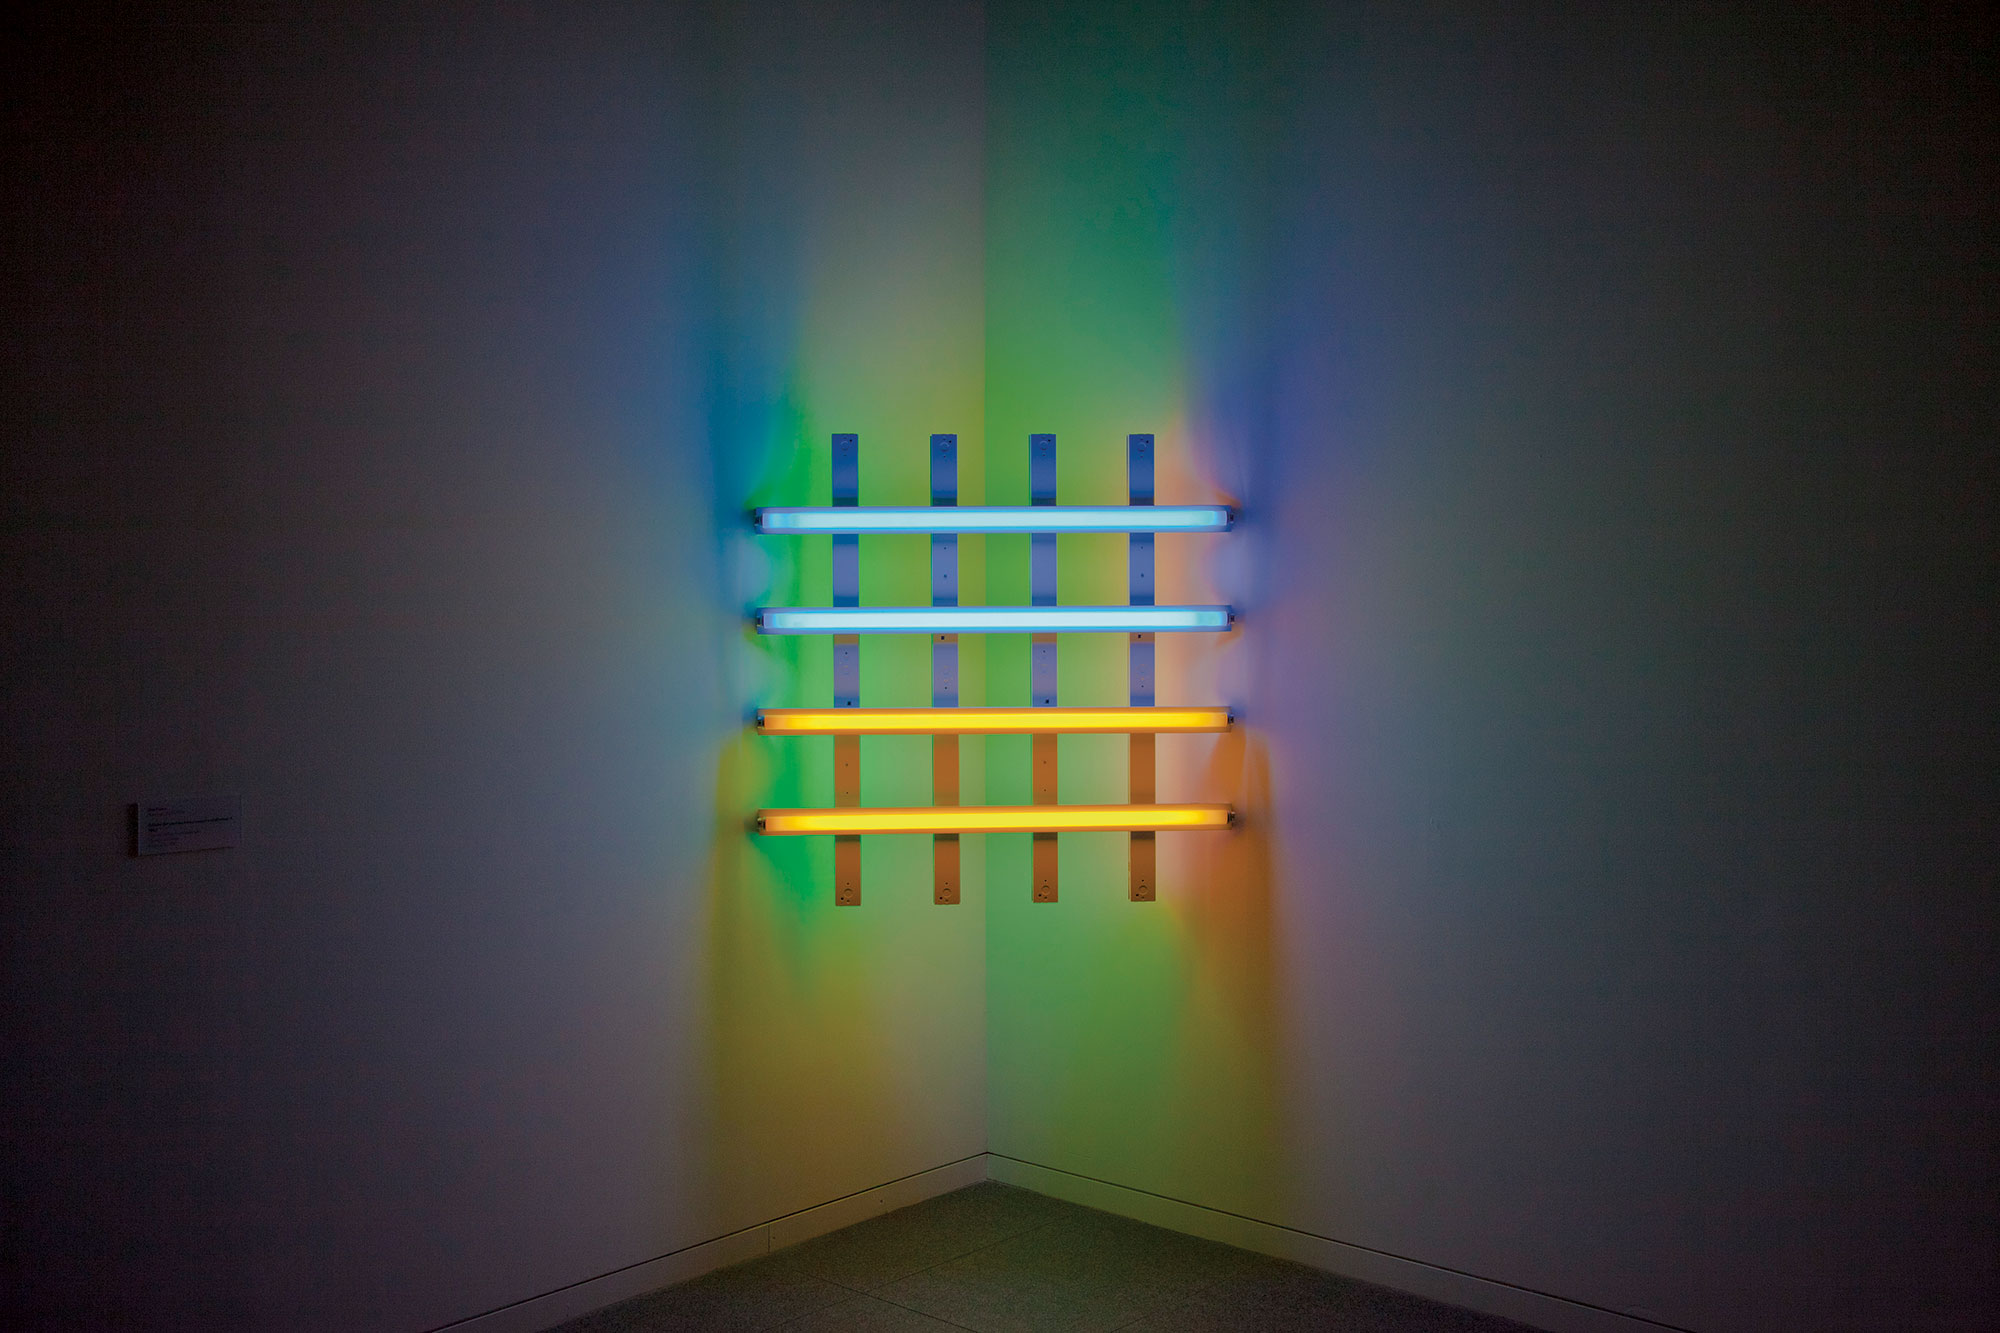 Dan Flavin, Untitled (for you Leo, in long respect and affection) 4, 1978